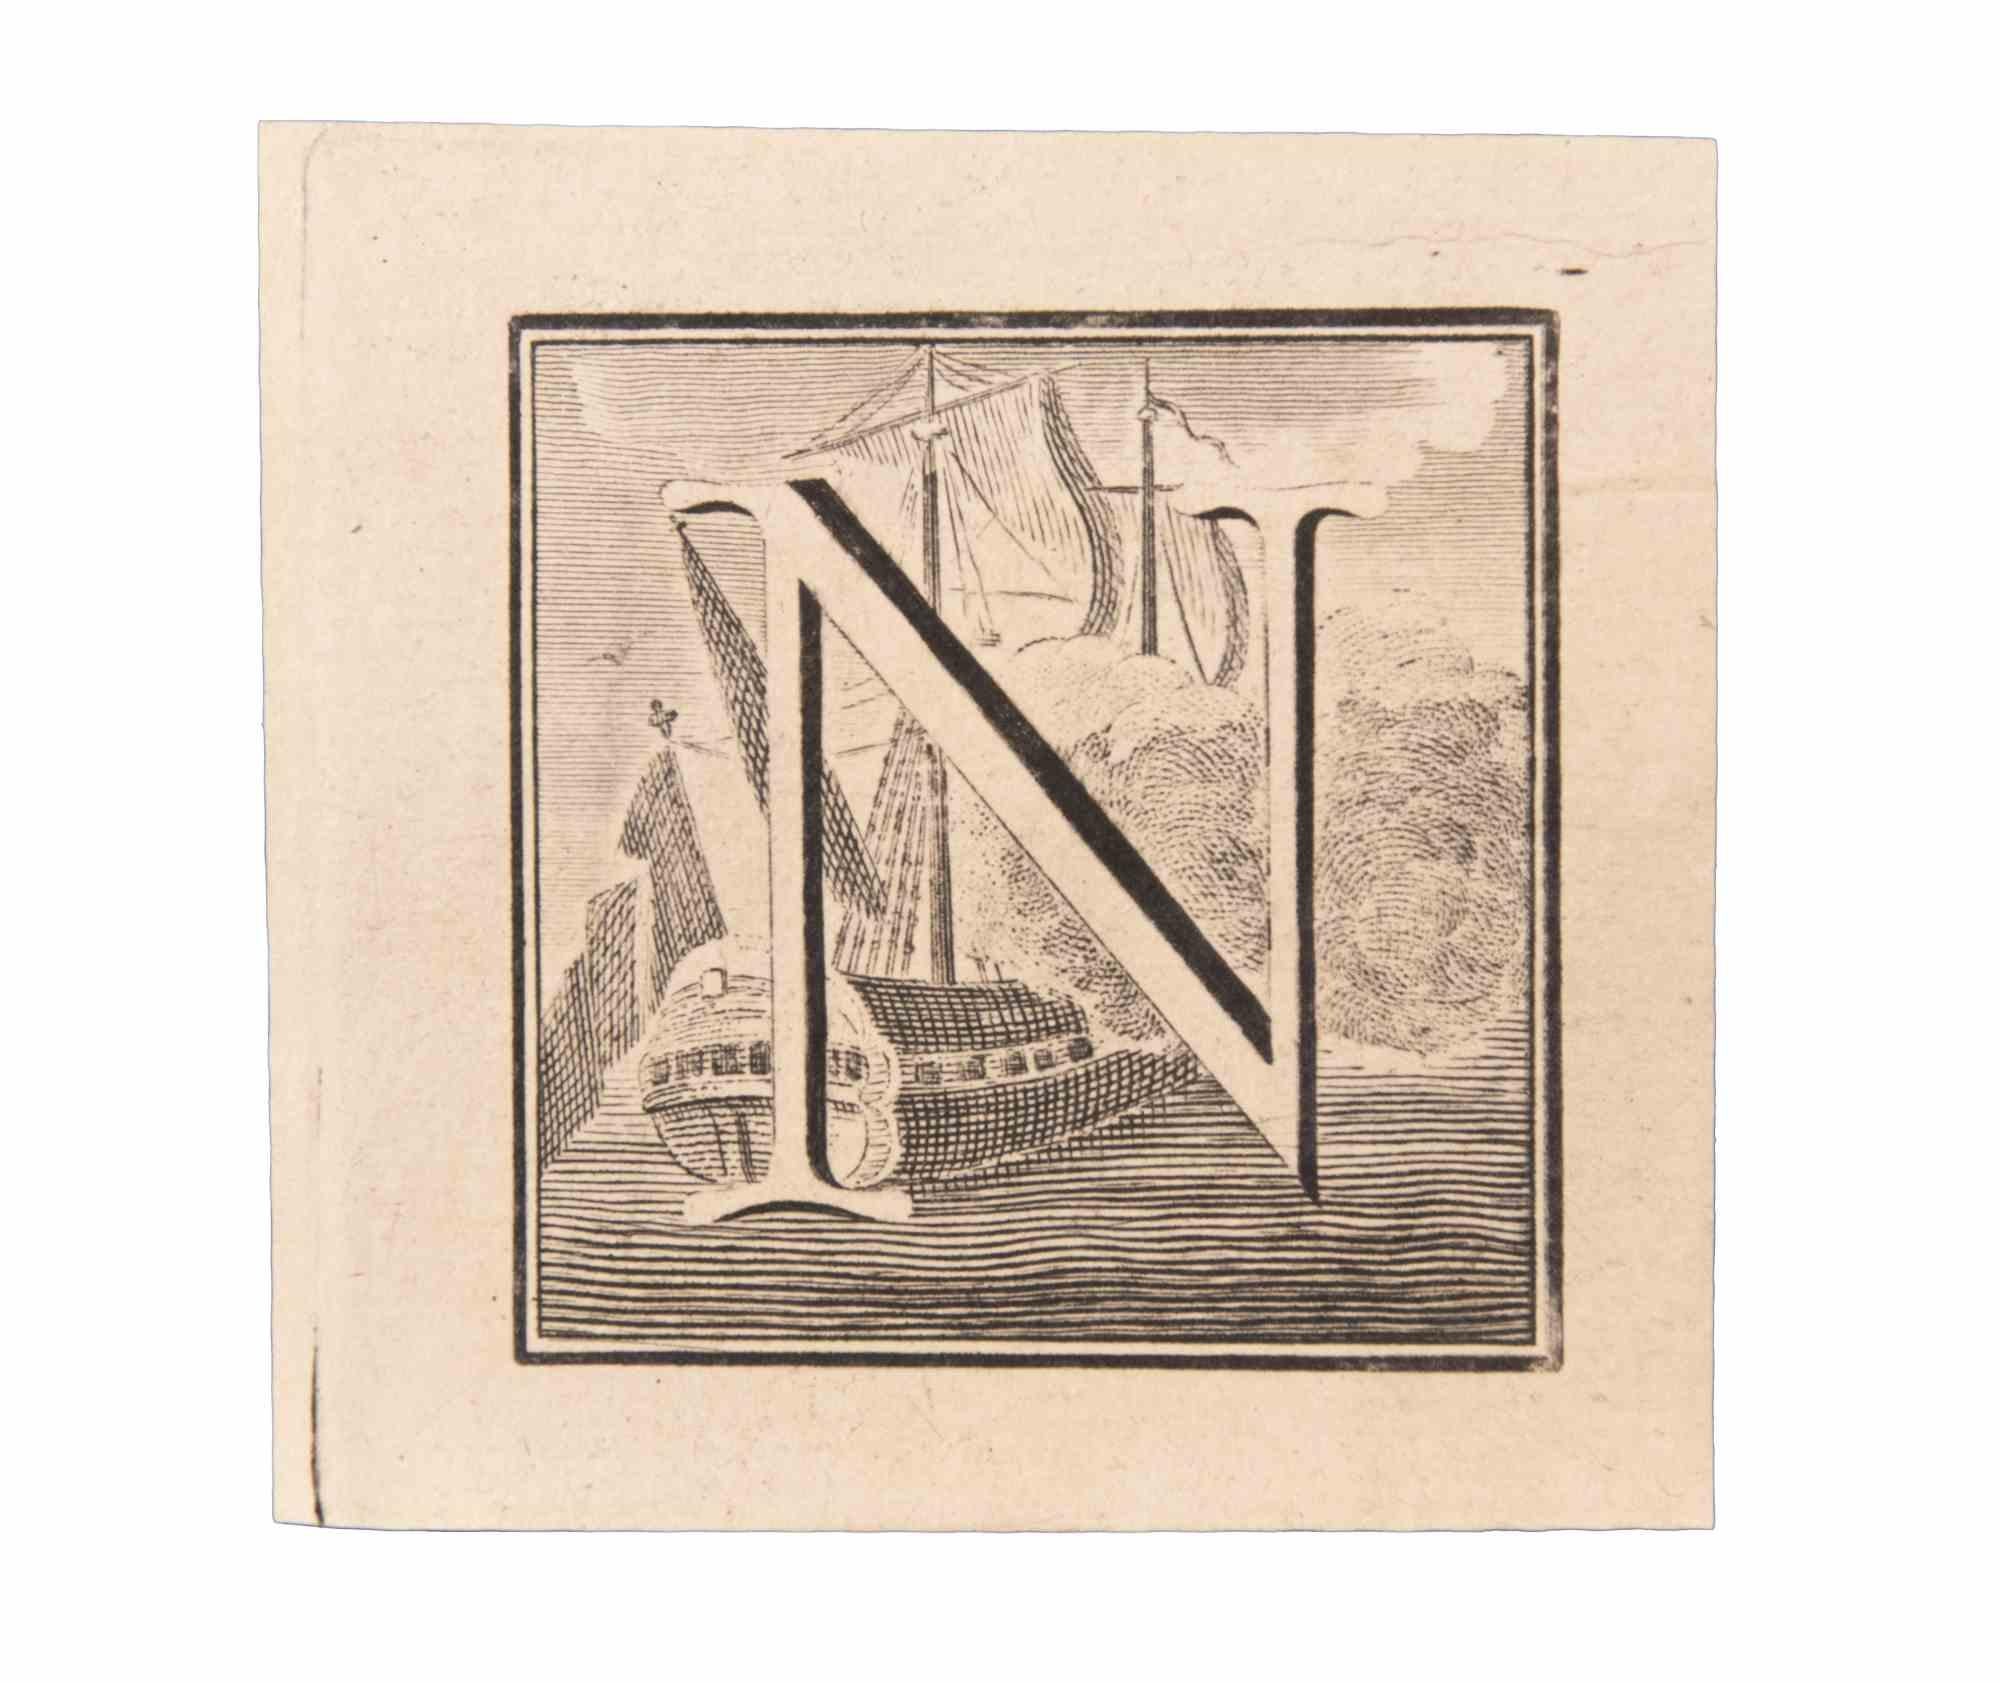 Letter N is an Etching realized by Luigi Vanvitelli of 18th century.

The etching belongs to the print suite “Antiquities of Herculaneum Exposed” (original title: “Le Antichità di Ercolano Esposte”), an eight-volume volume of engravings of the finds